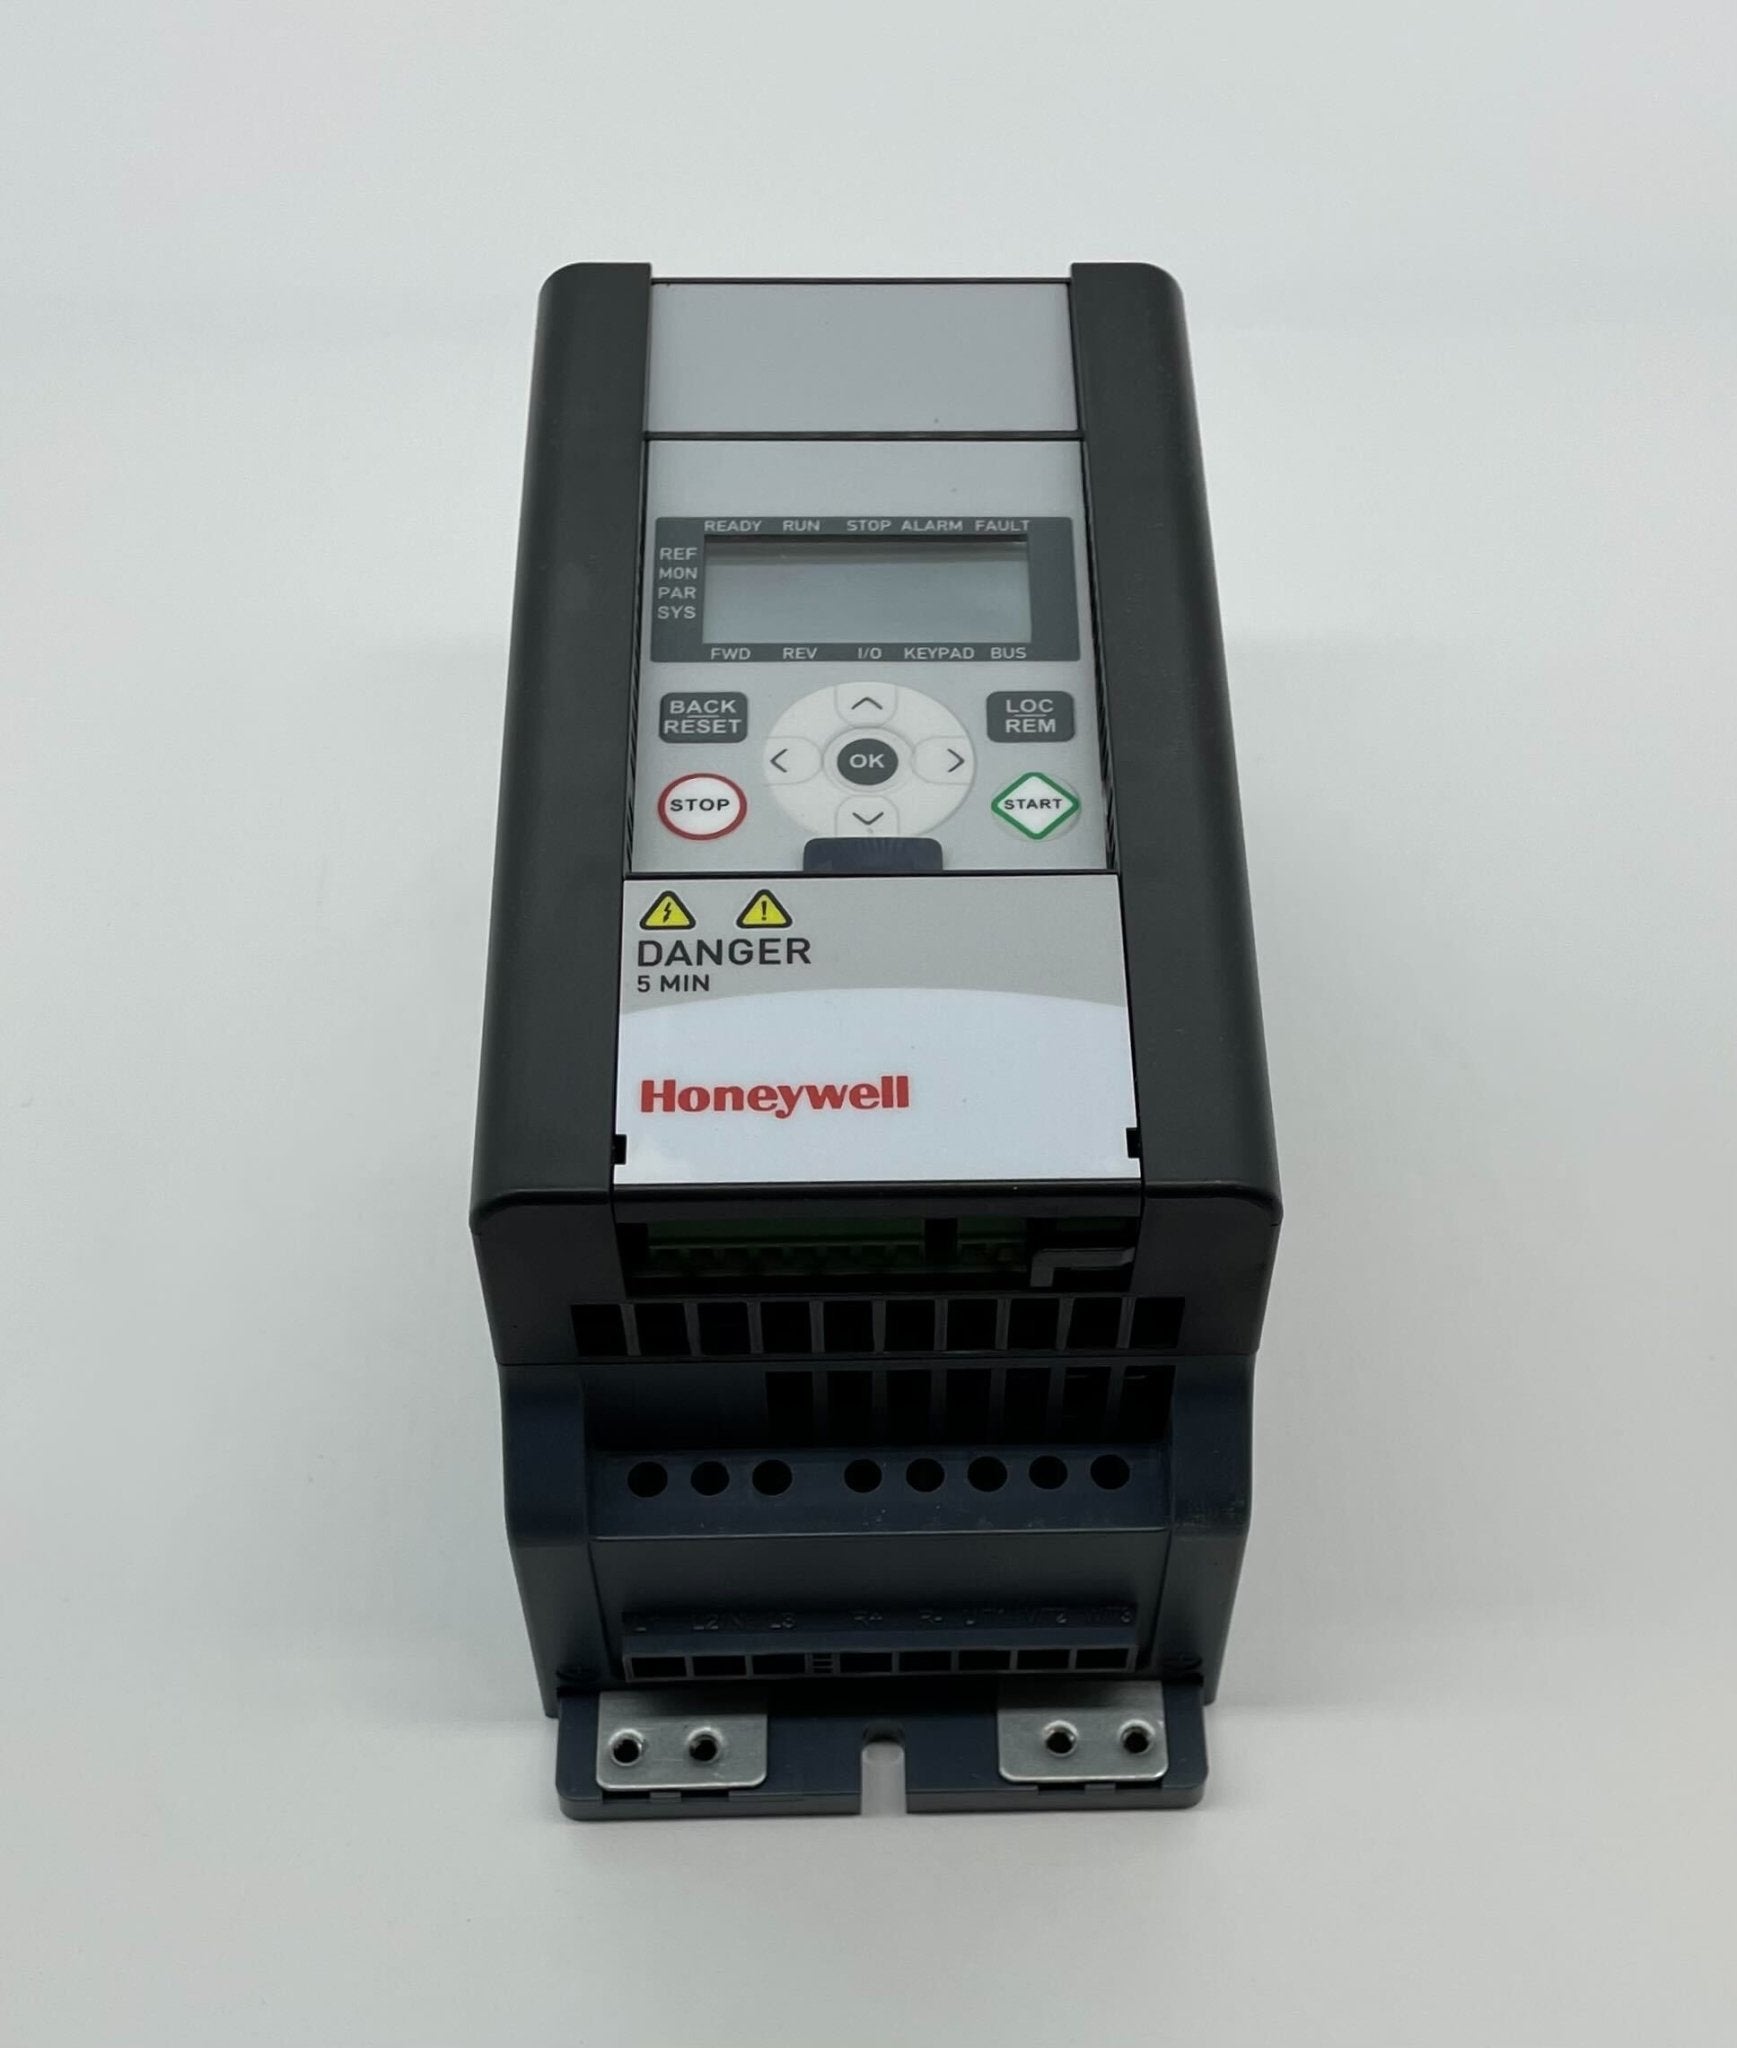 Honeywell HVFD2D3B0020 Variable Frequency Drive Box - The Fire Alarm Supplier